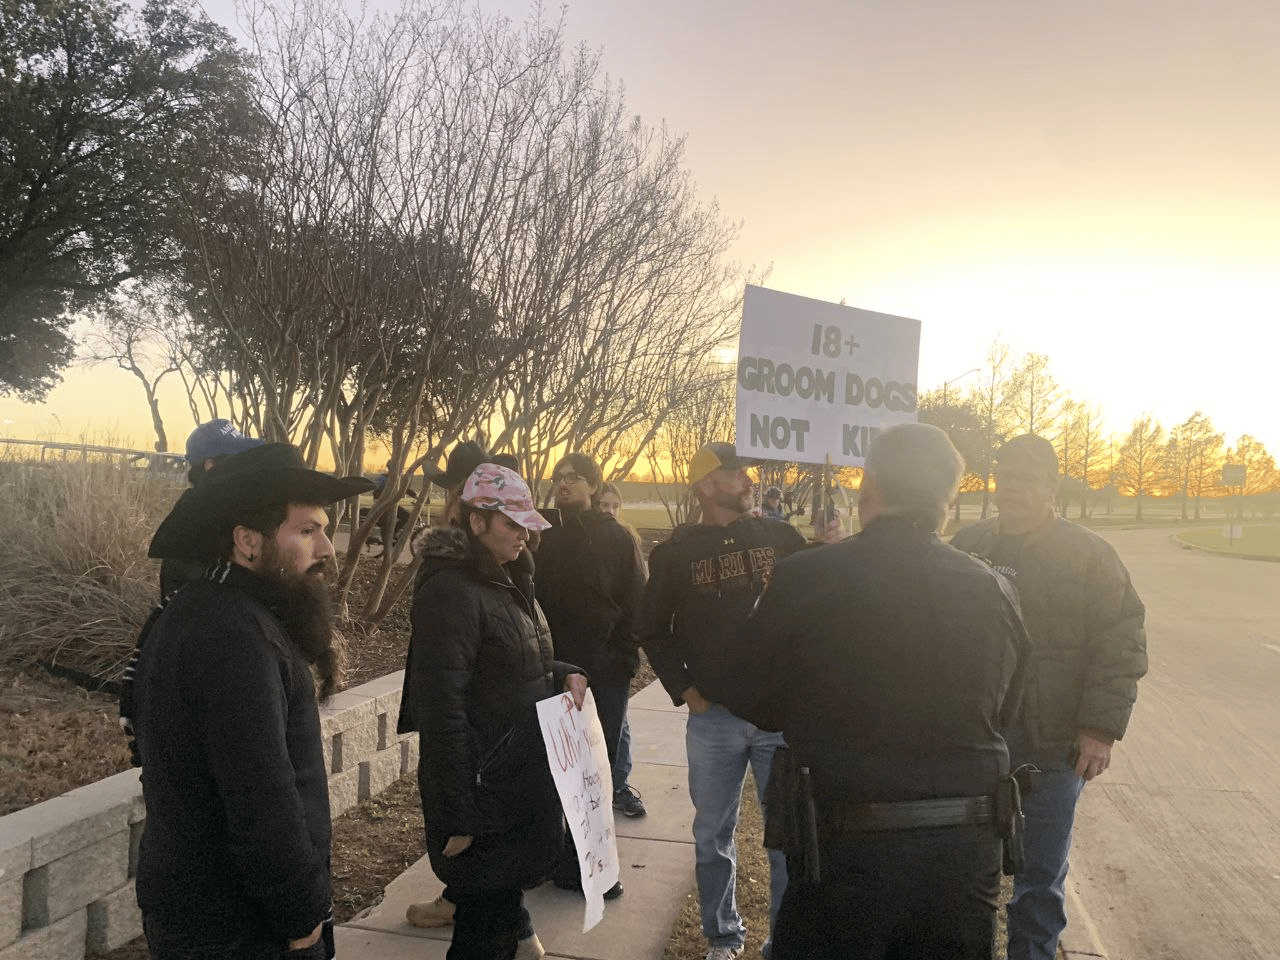 (Video) Aryan Freedom Network (AFN) Drag Queen (LGBTQ) Protest in Grand Prairie, Dallas-Fort Worth Area, Texas, United States - 17 December 2022